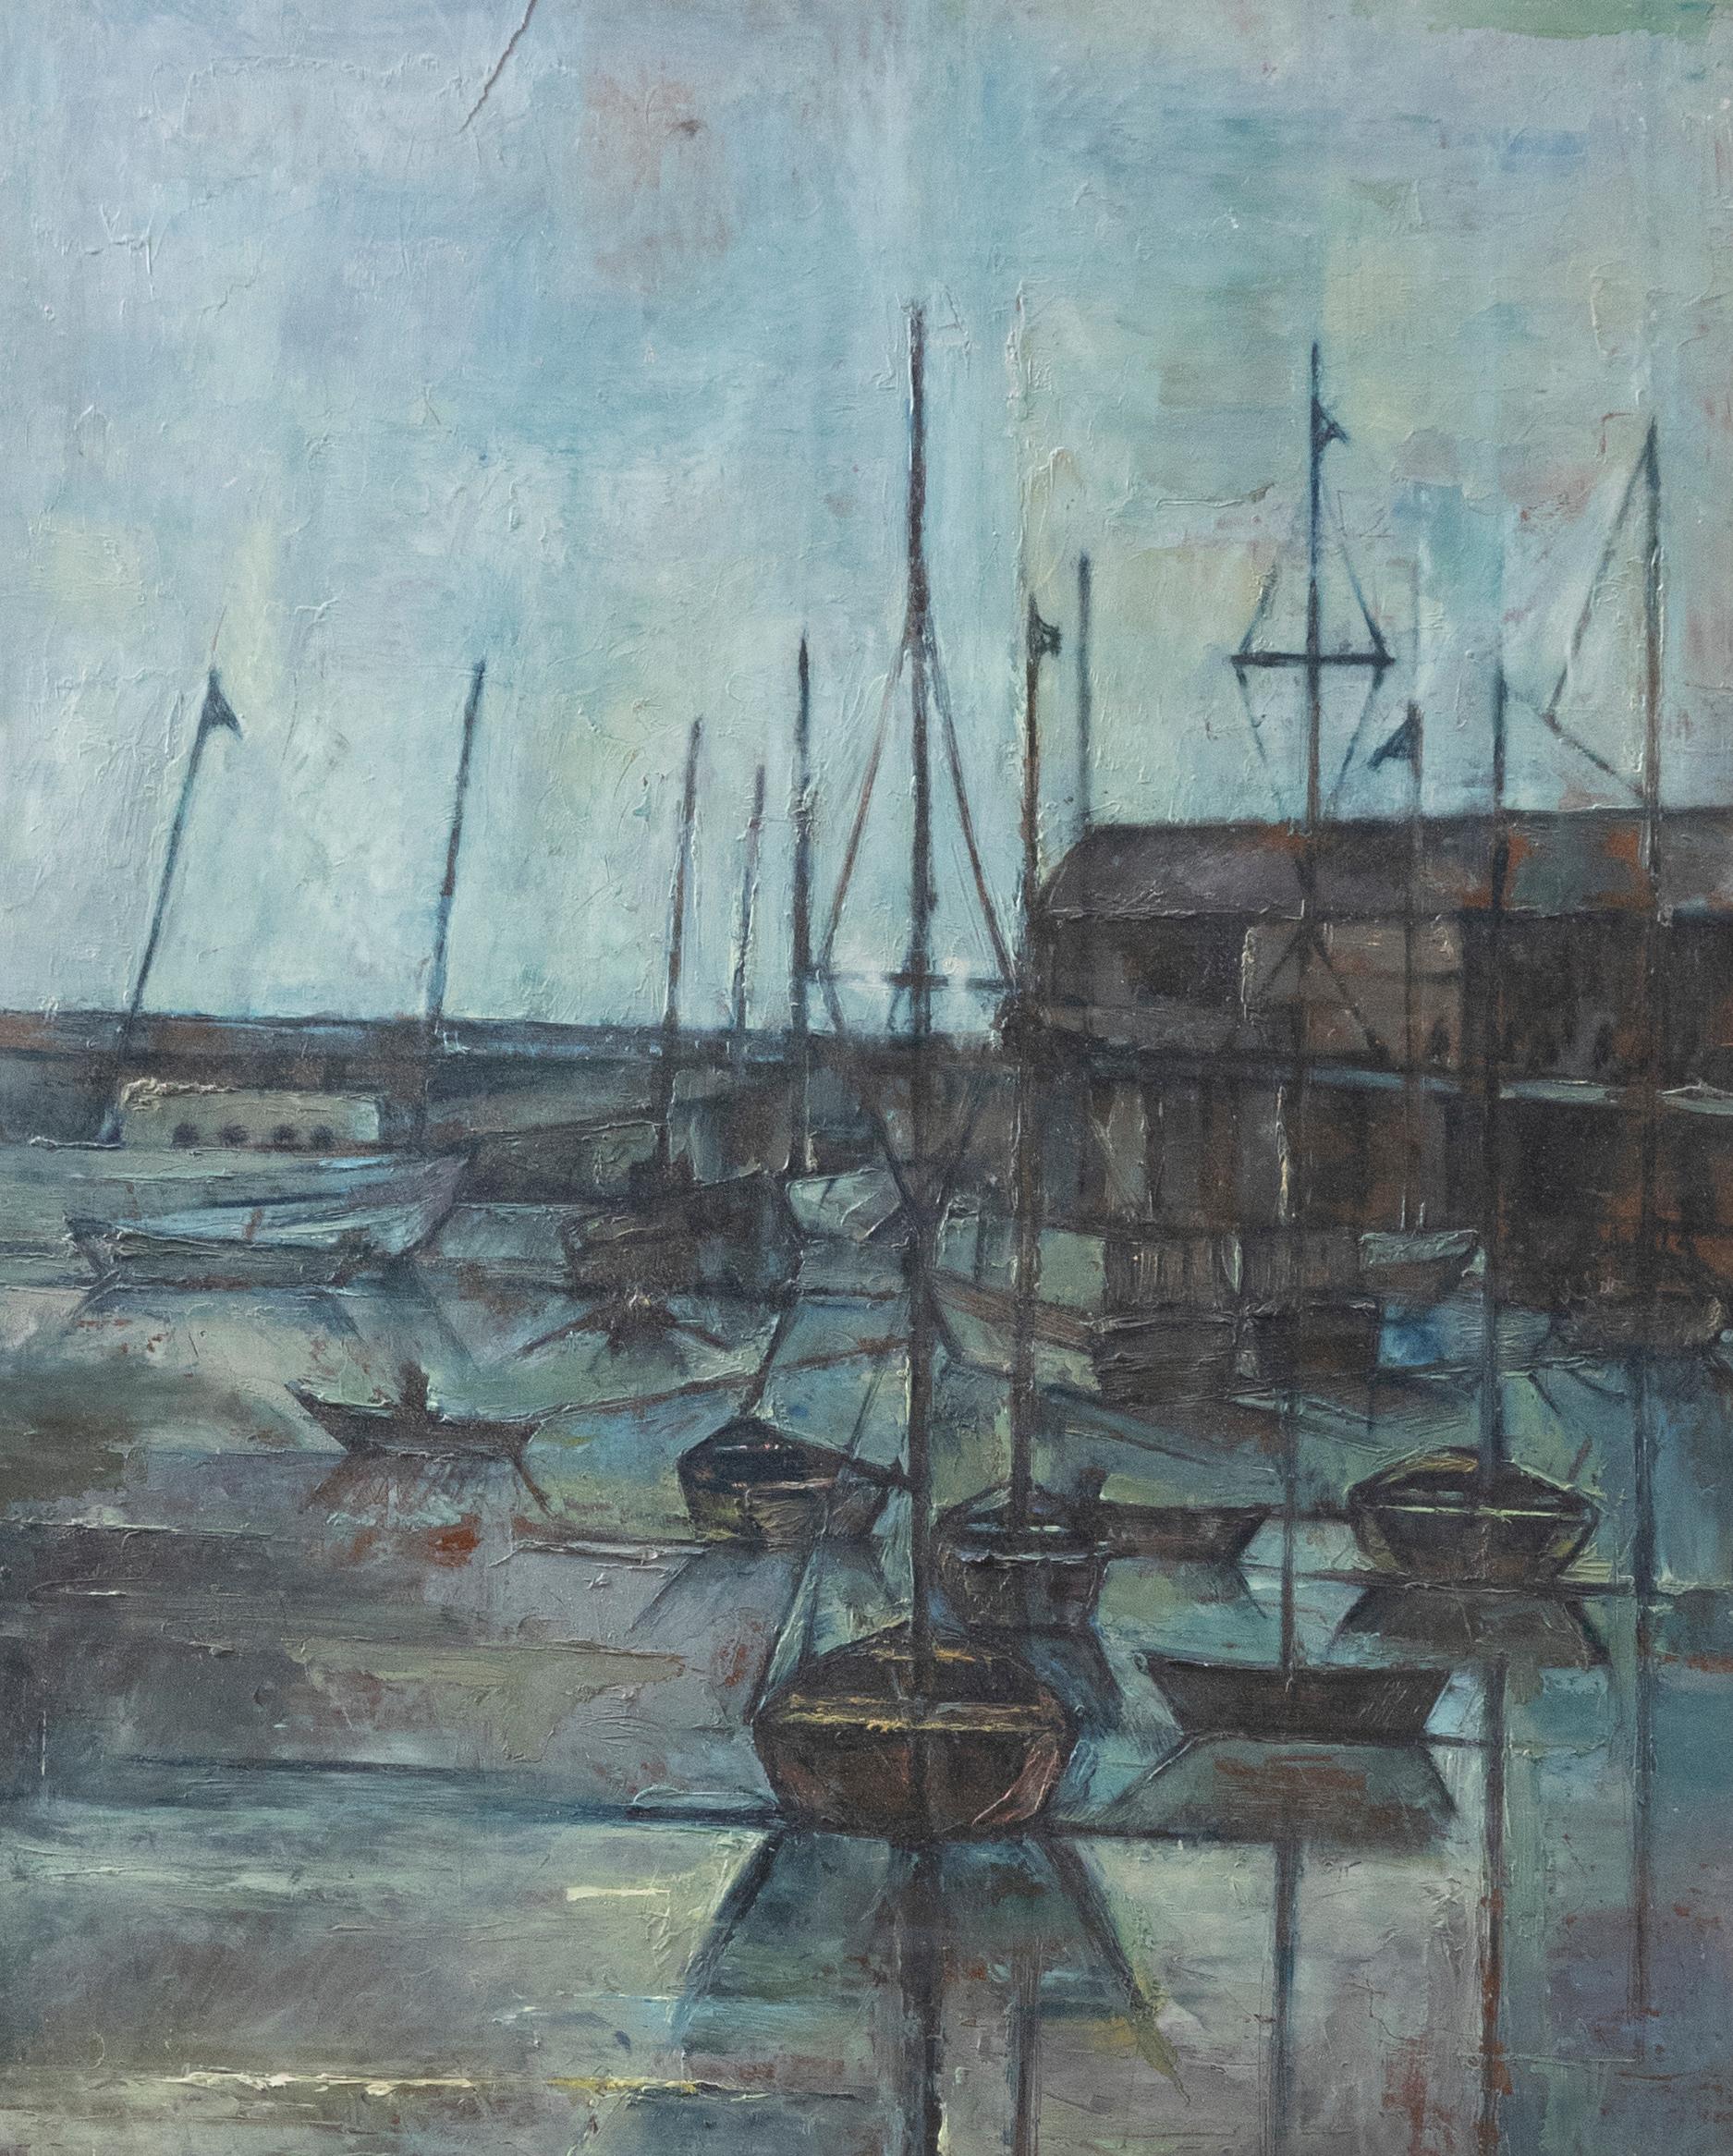 Figurative Painting Unknown - Huile du 20e siècle - The Harbour at Night